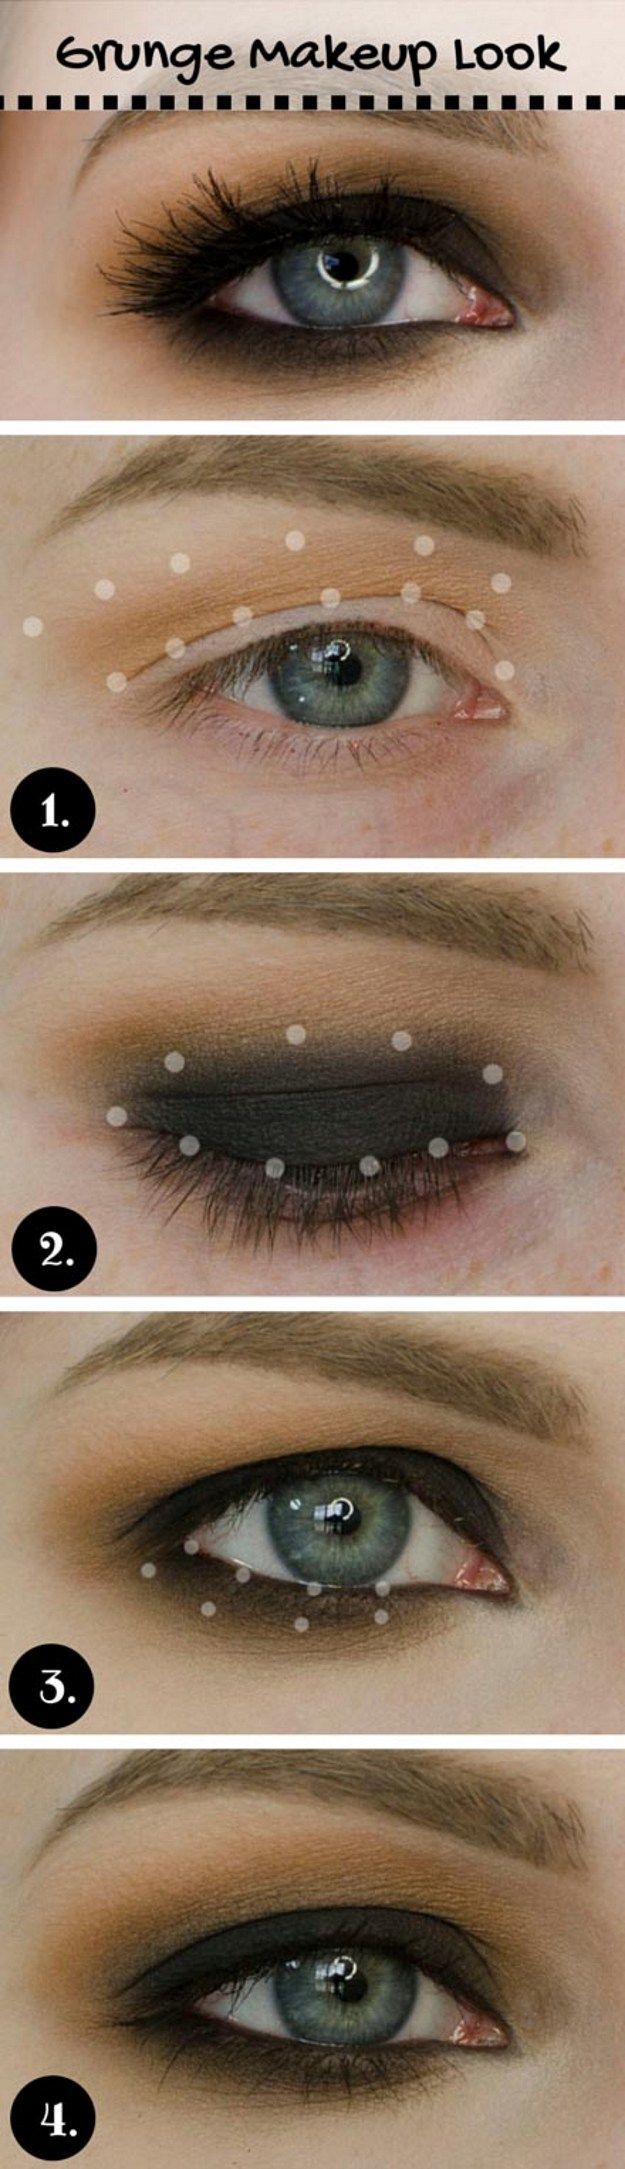 How to Do Edgy Makeup for Blue Eyes | Easy Makeup by Makeup Tutorials at www.mak...